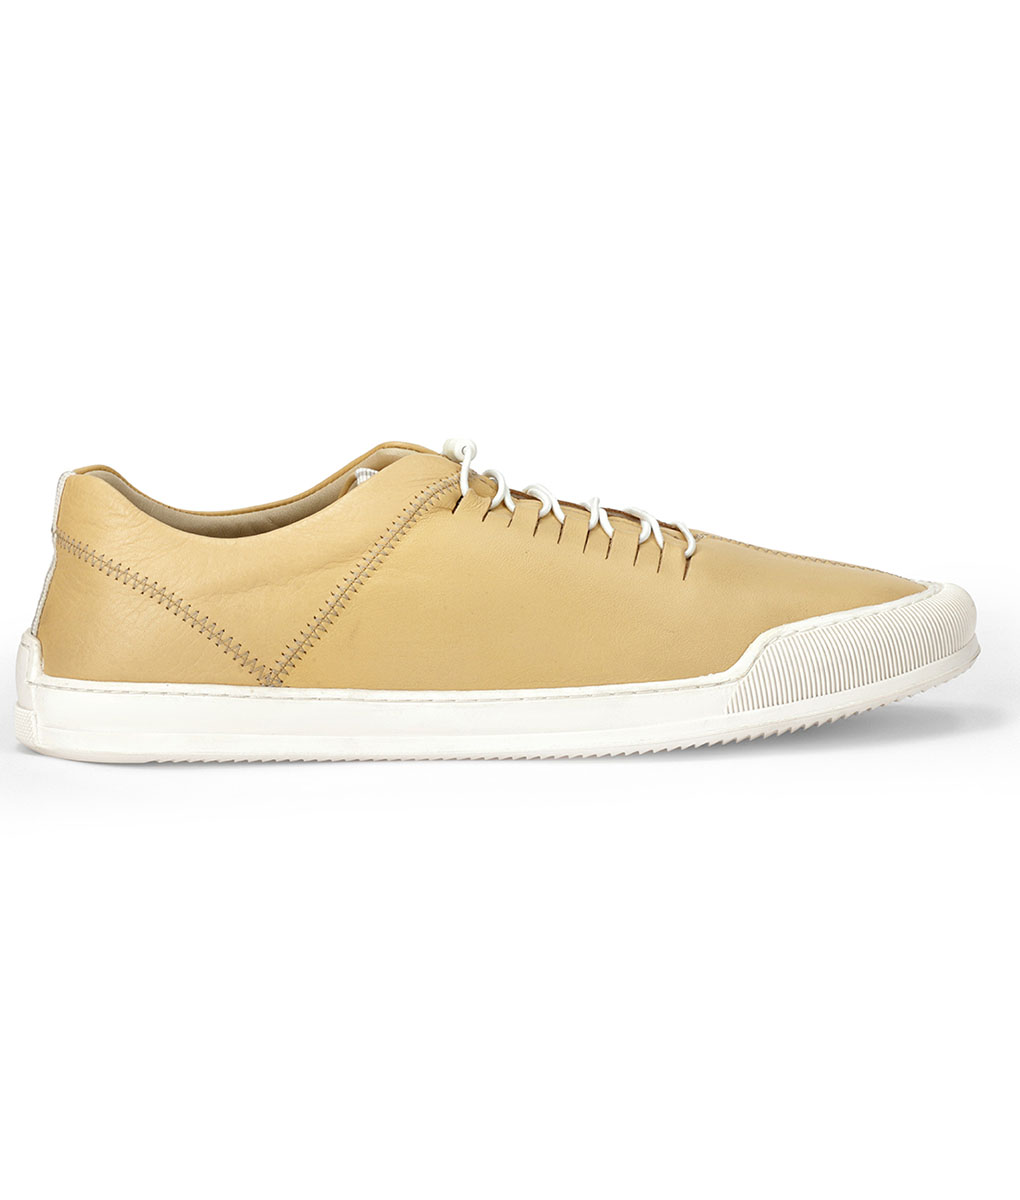 Beige Leather Sneakers for Men